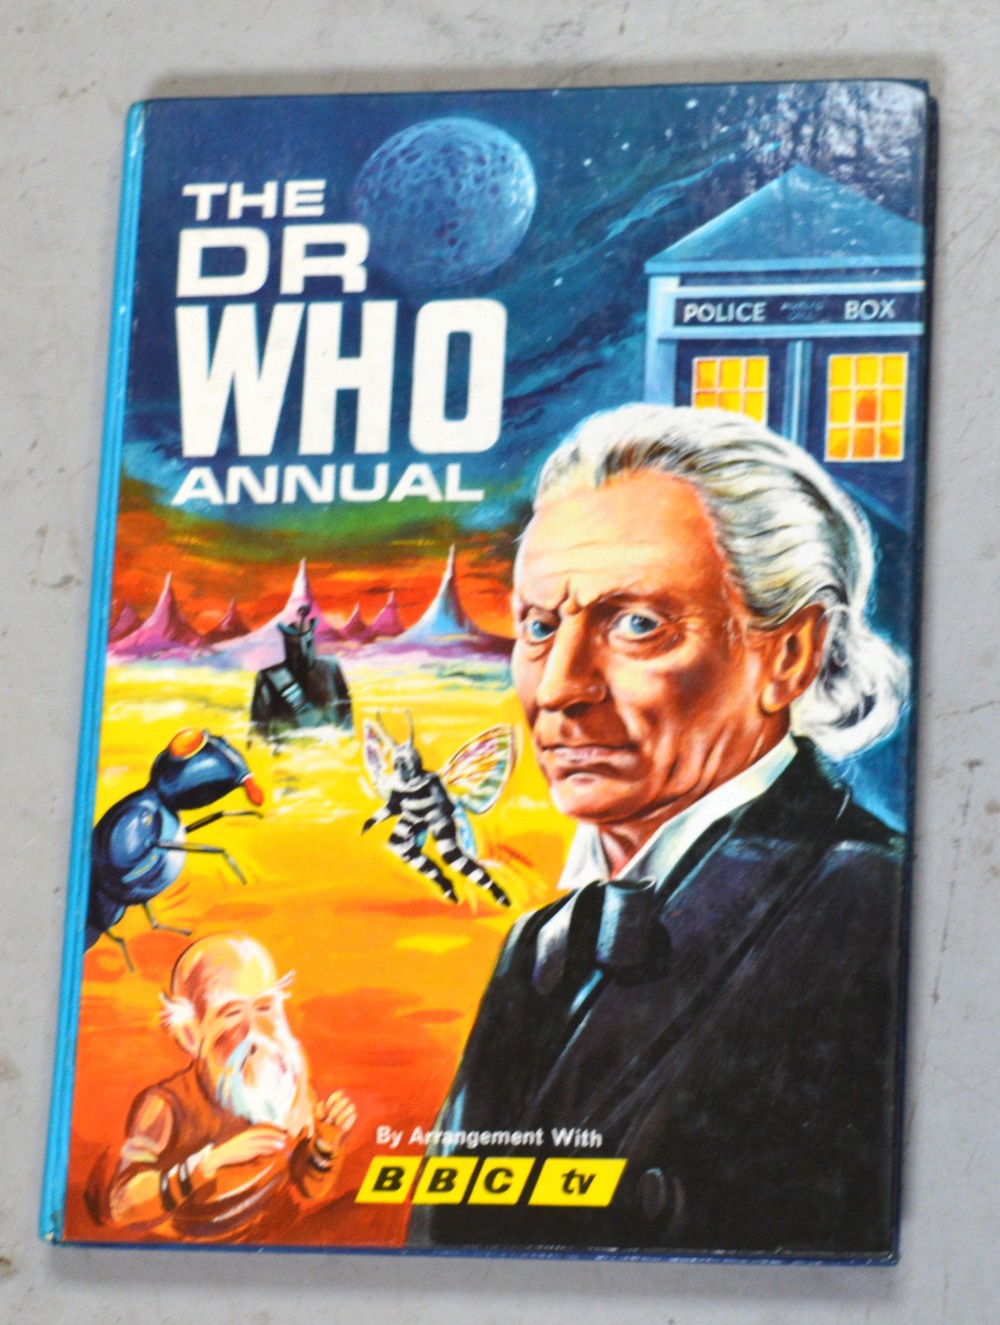 The Doctor Who Annual 1965.